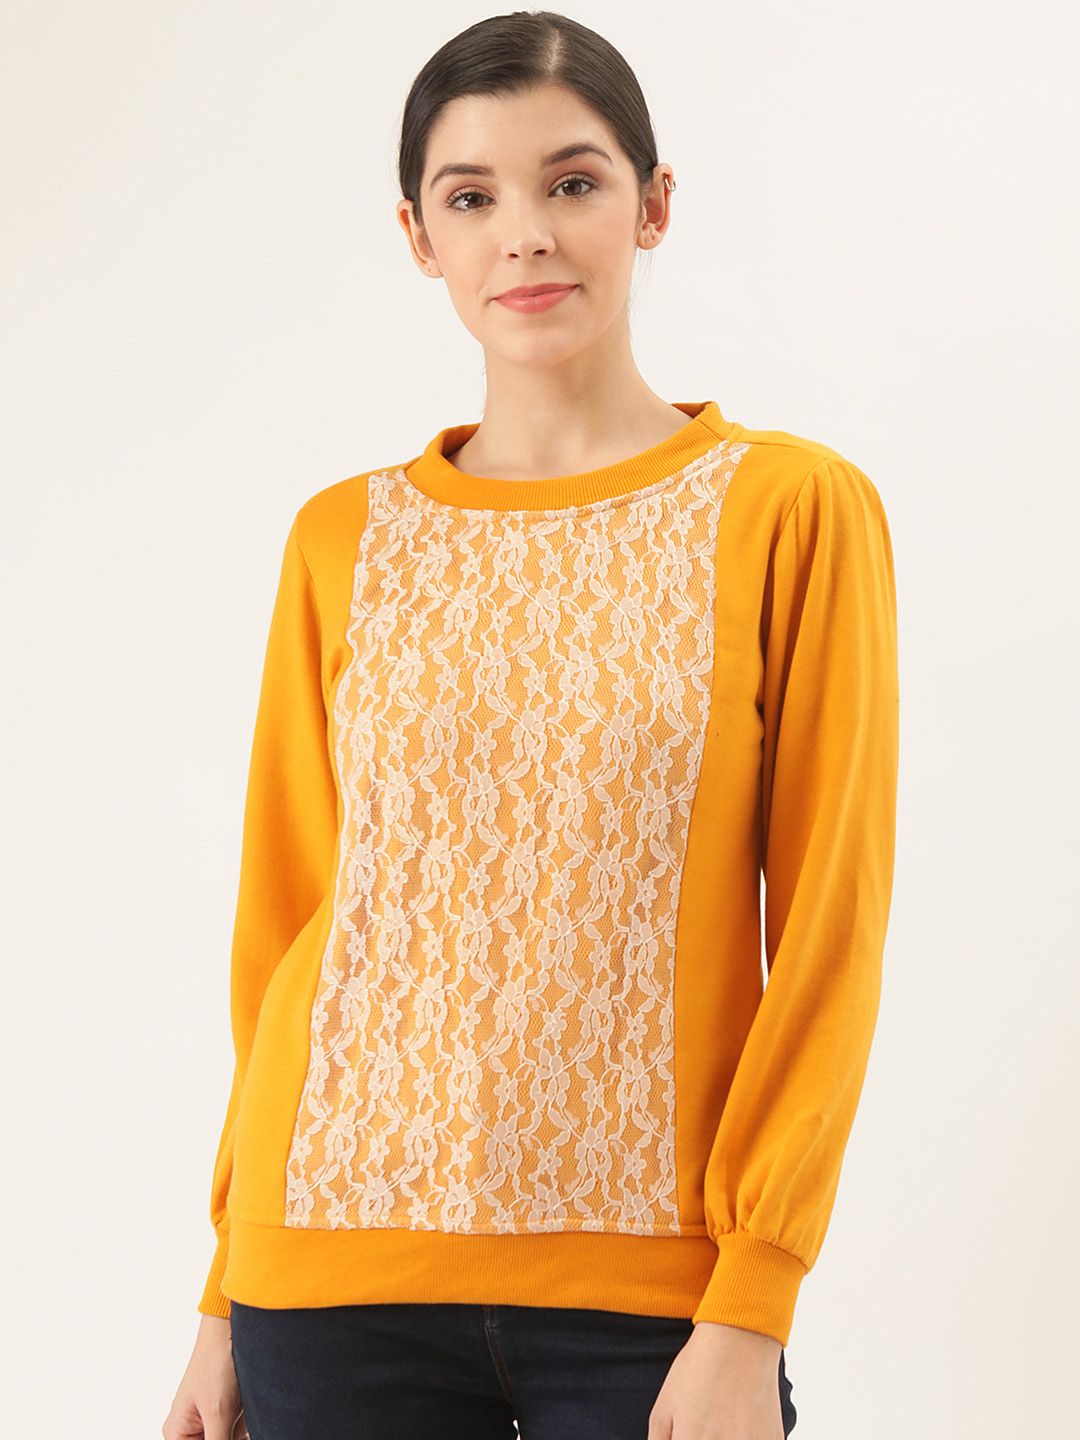 Belle Fille Women Mustard Yellow & White Lace Inserts Sweatshirt Price in India